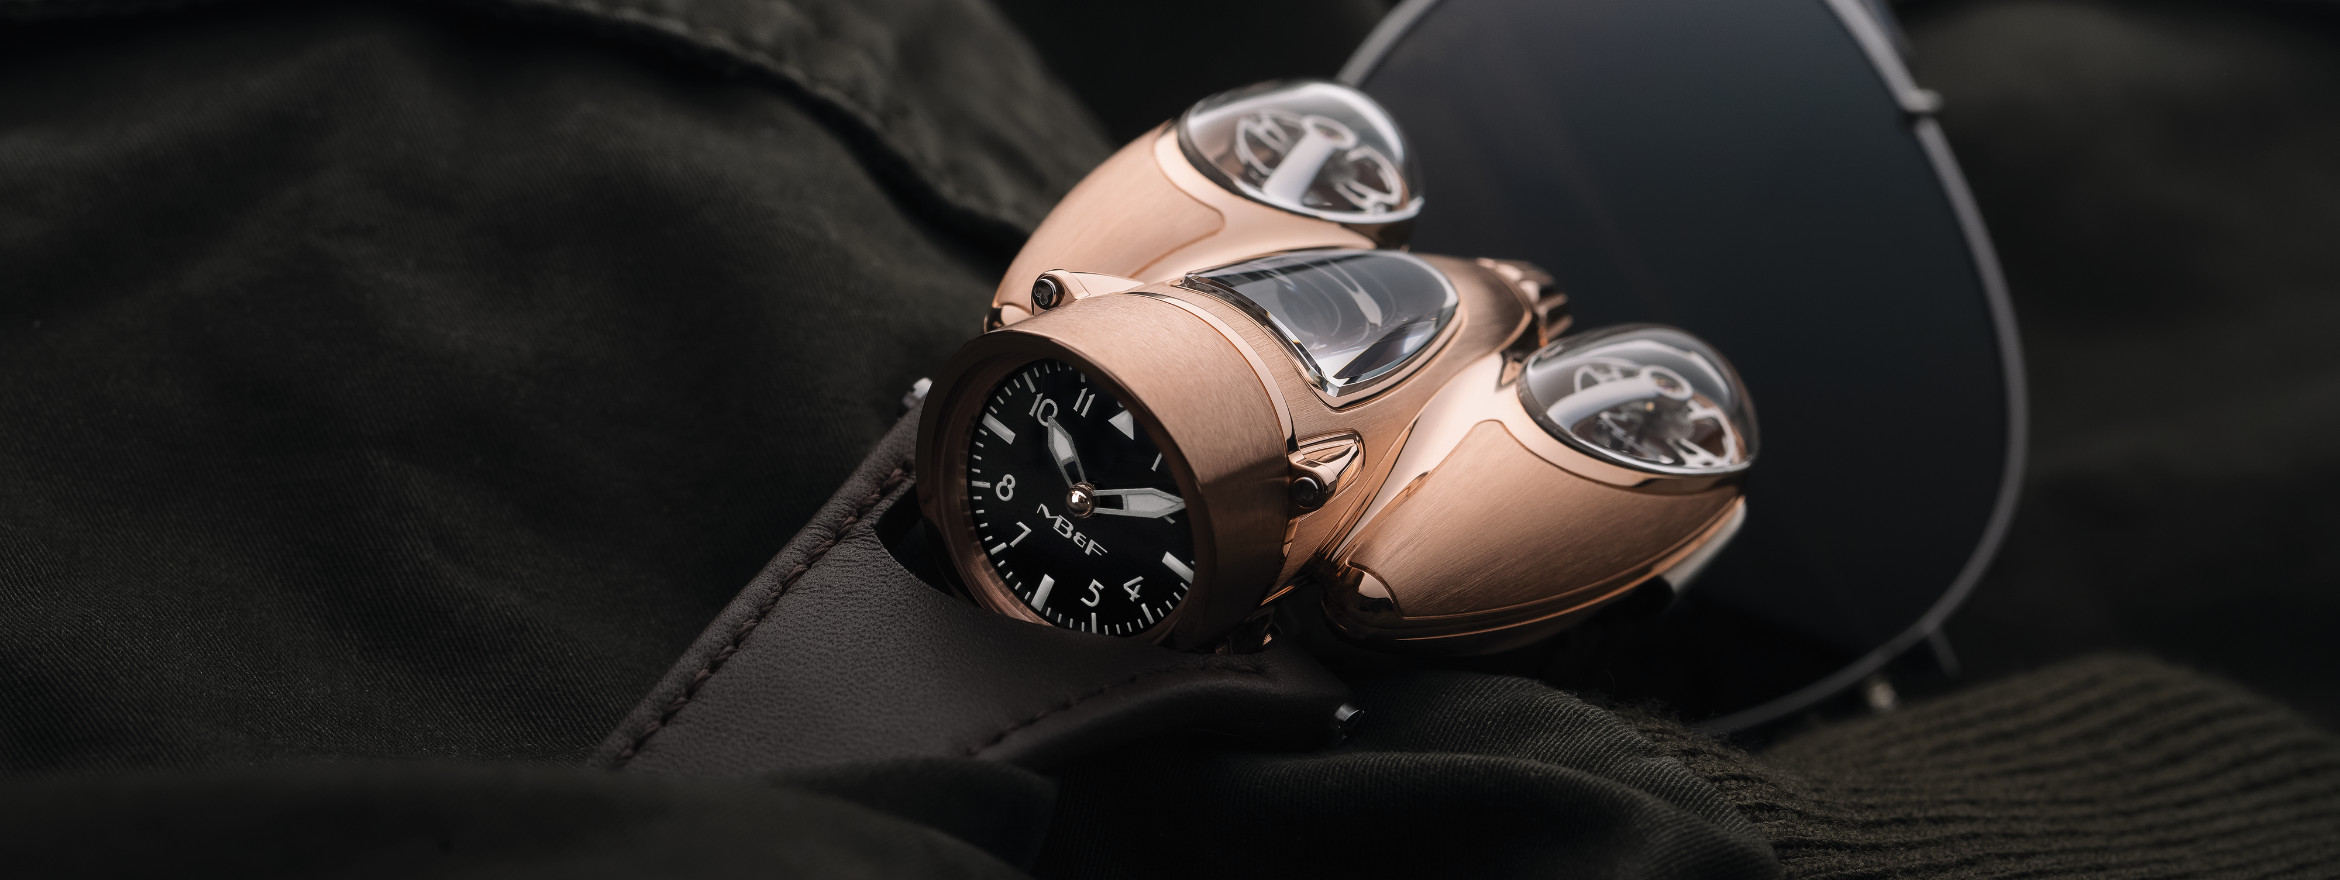 MB&F Horological Machines – A Thematic Evolution: Land and Air